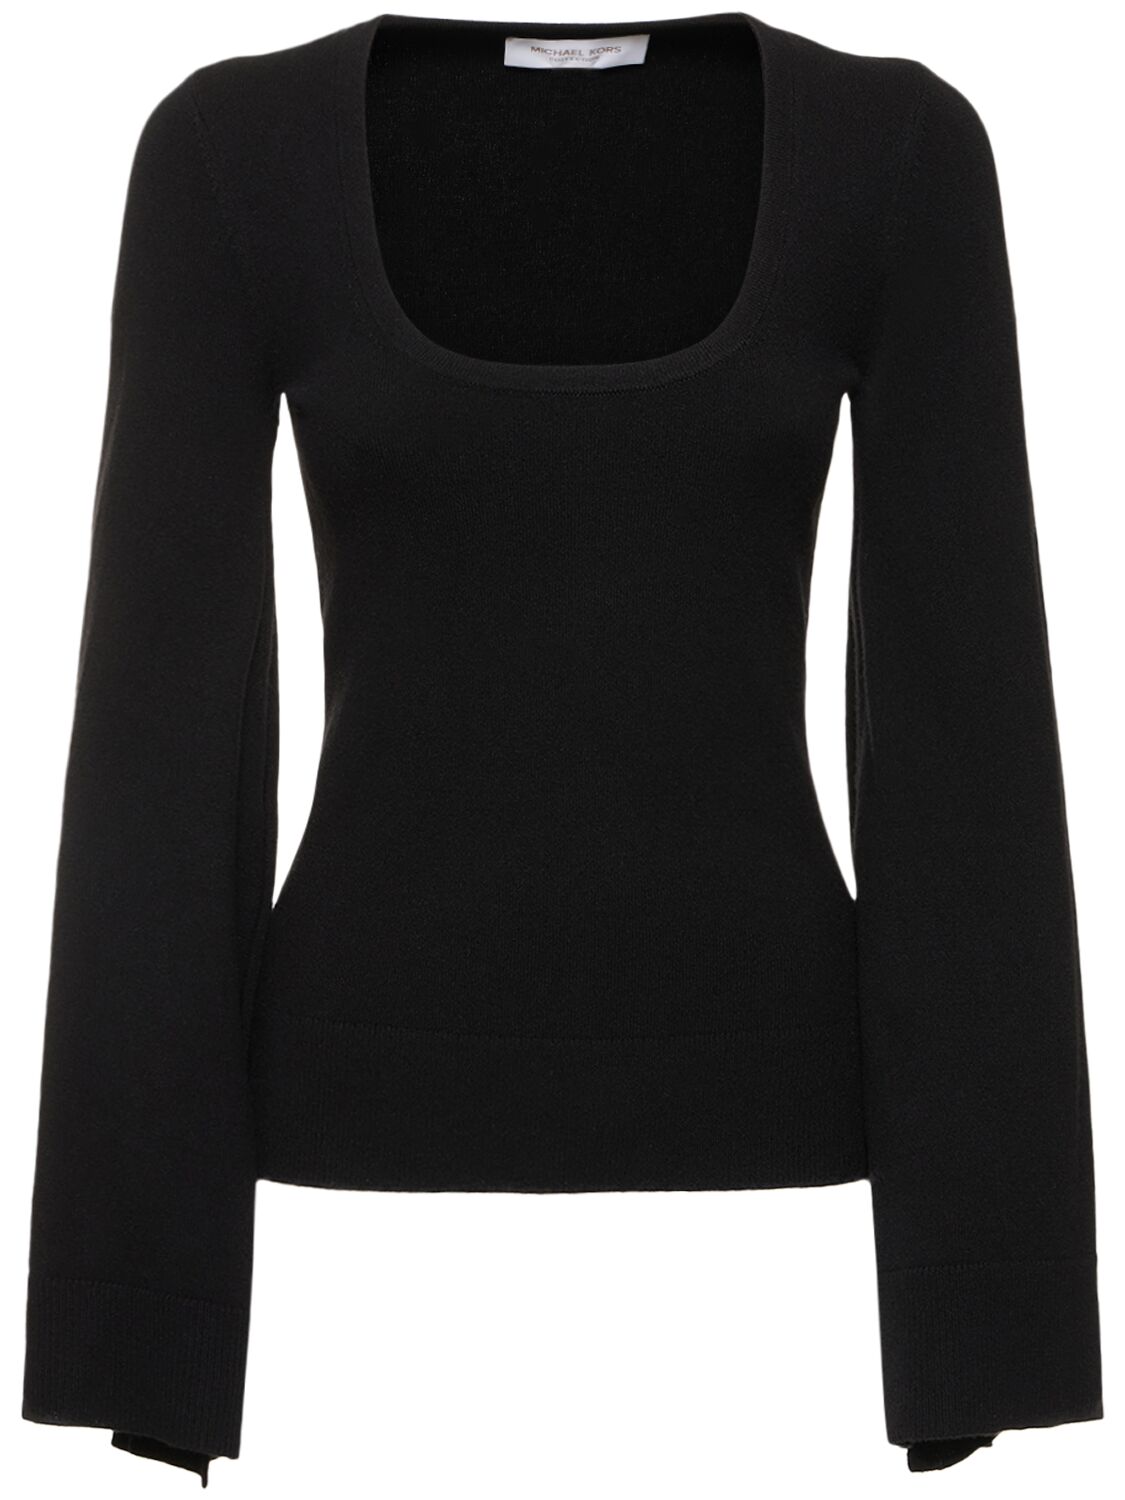 Michael Kors Knit Cashmere Blend Sweater In Black